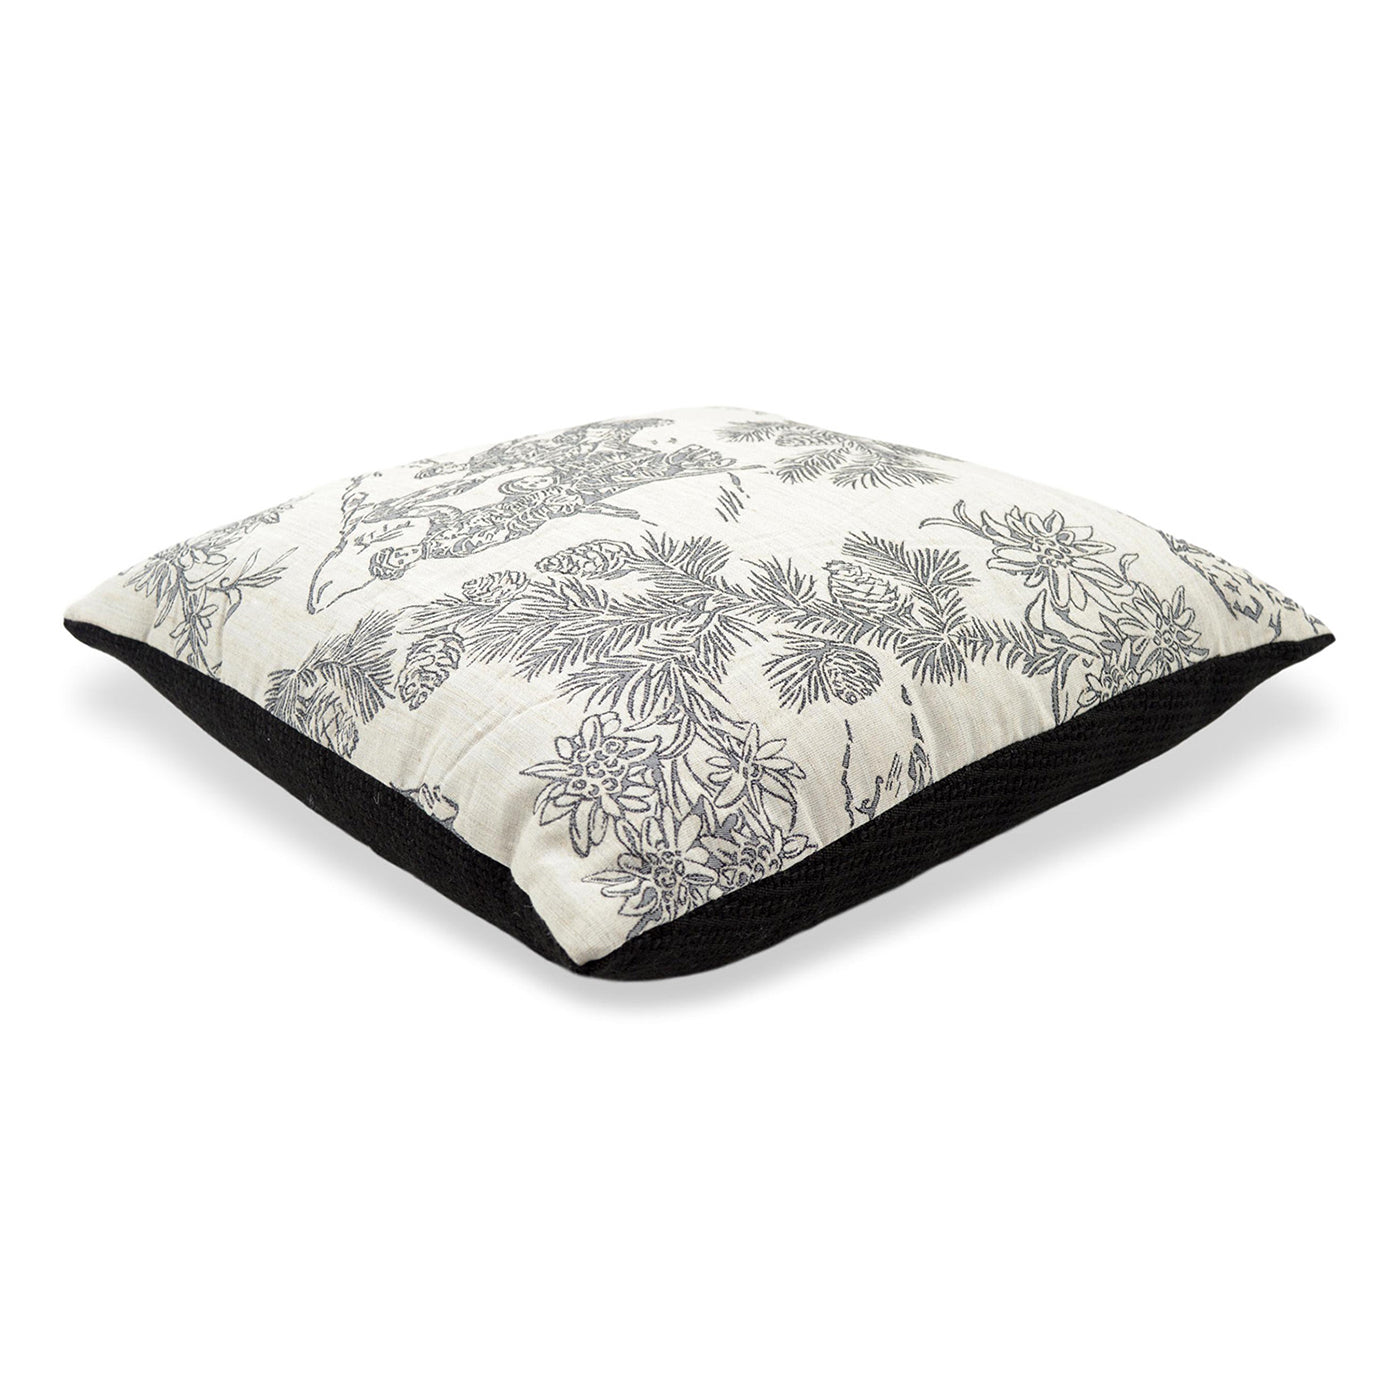 Black and White Carré Cushion in toile de jouy jacquard fabric - Alternative view 1